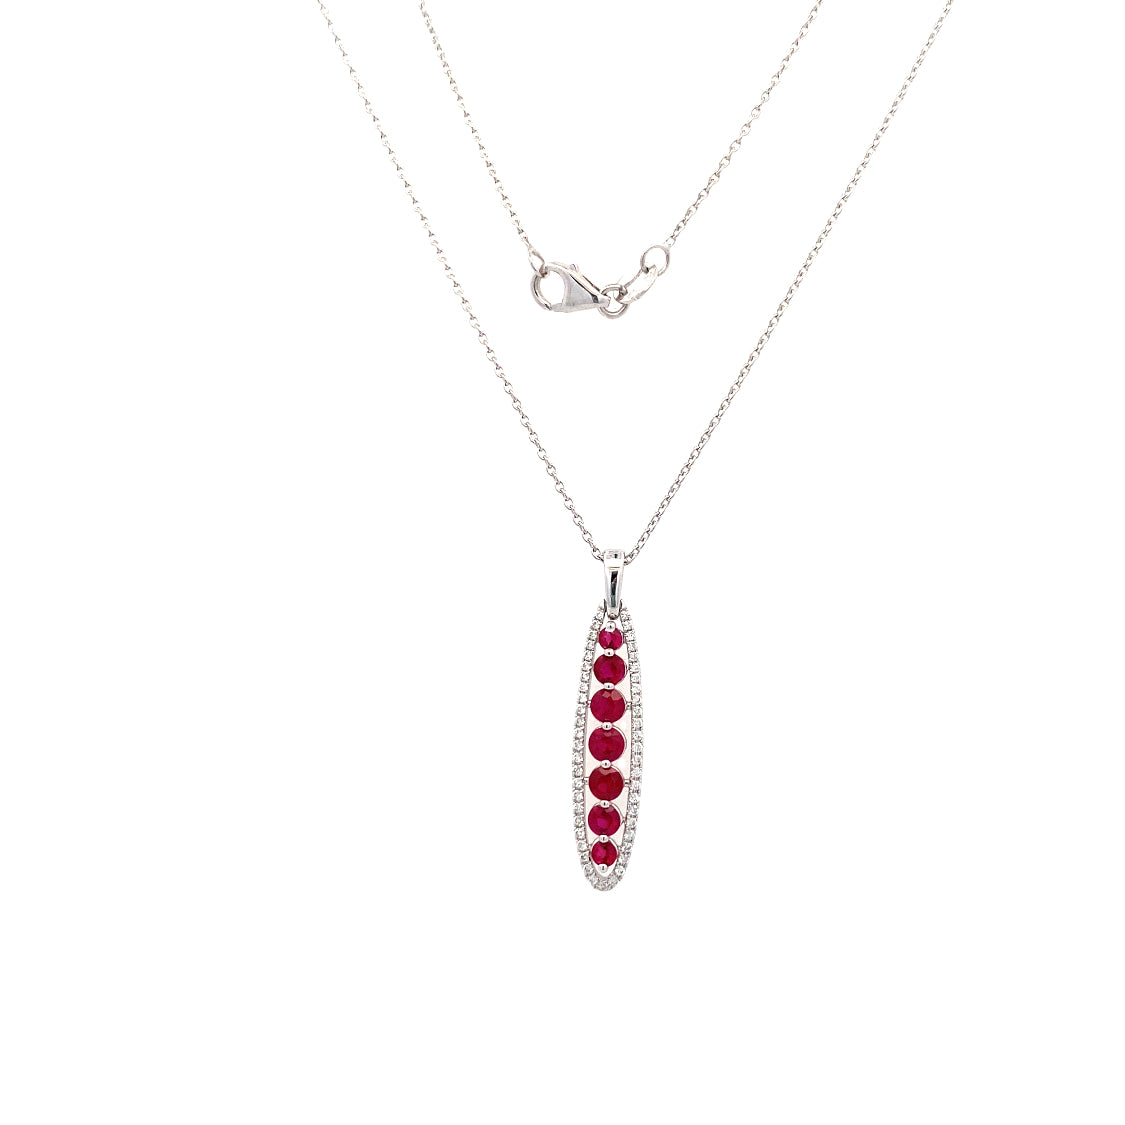 White Gold  Drop Style RubyPendants PP870DR